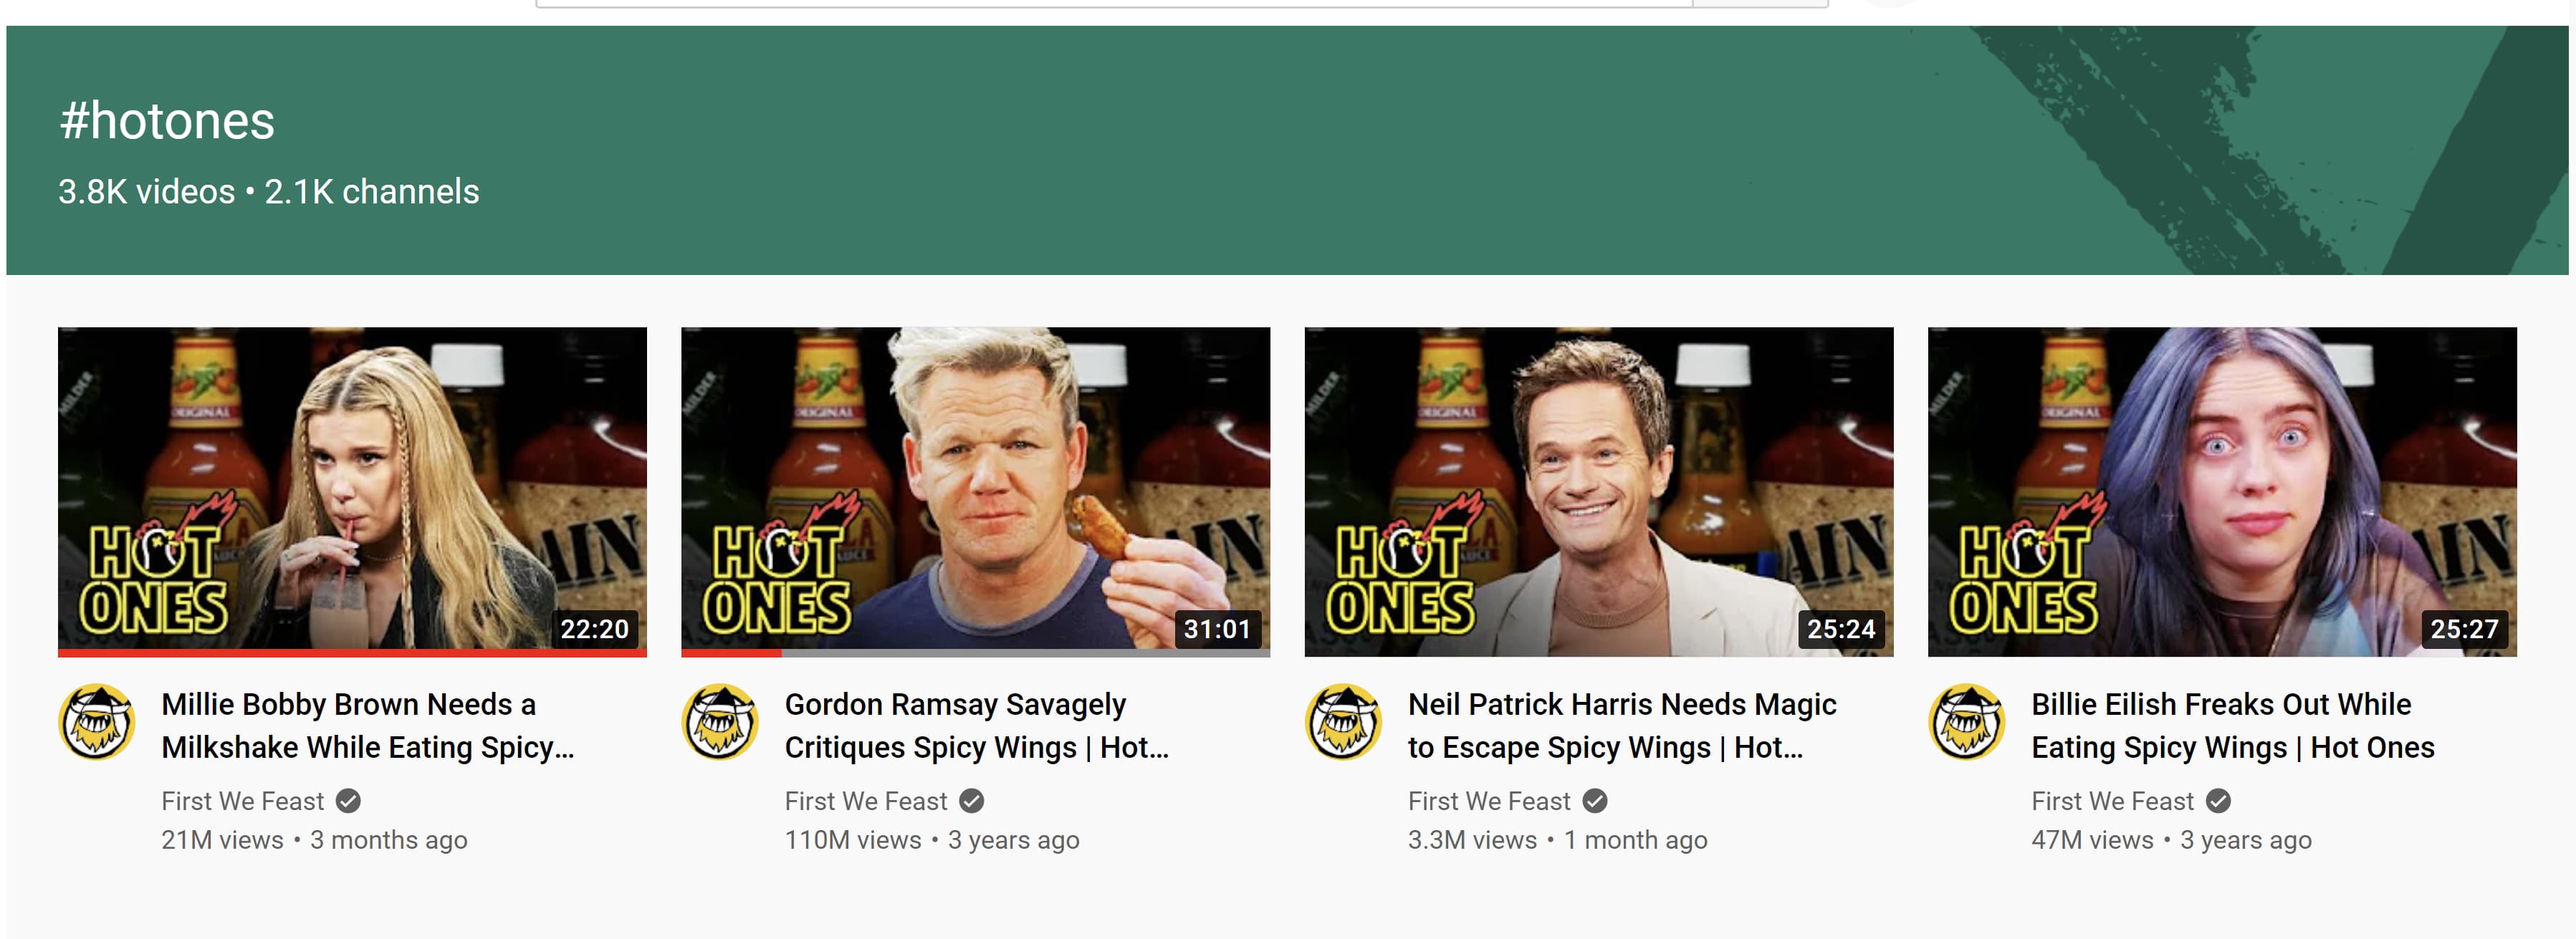 The YouTube hashtag #hotones takes users to a page of videos all using the tag